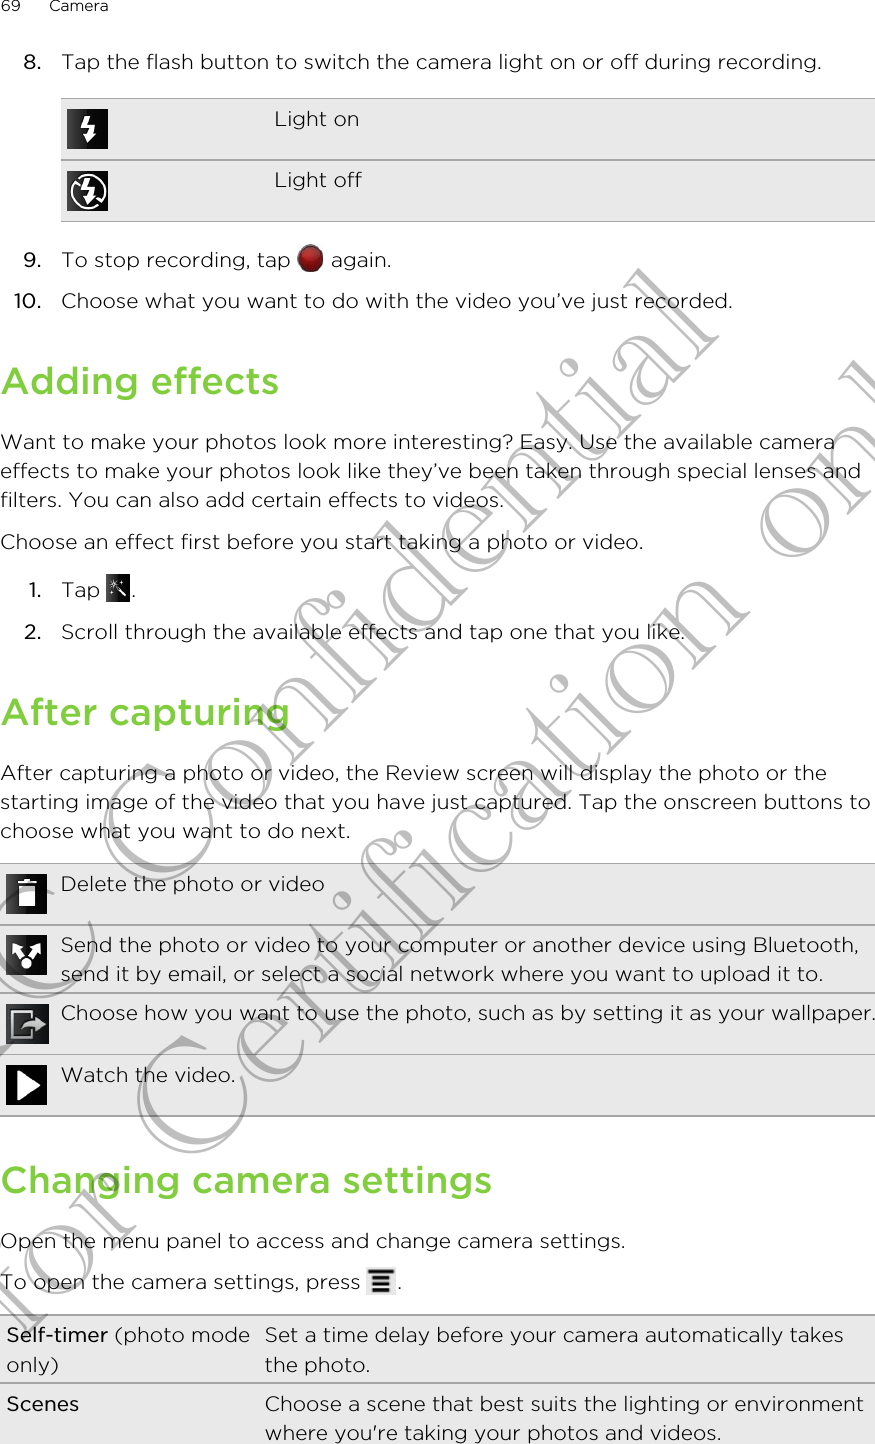 8. Tap the flash button to switch the camera light on or off during recording.Light onLight off9. To stop recording, tap   again.10. Choose what you want to do with the video you’ve just recorded.Adding effectsWant to make your photos look more interesting? Easy. Use the available cameraeffects to make your photos look like they’ve been taken through special lenses andfilters. You can also add certain effects to videos.Choose an effect first before you start taking a photo or video.1. Tap  .2. Scroll through the available effects and tap one that you like.After capturingAfter capturing a photo or video, the Review screen will display the photo or thestarting image of the video that you have just captured. Tap the onscreen buttons tochoose what you want to do next.Delete the photo or videoSend the photo or video to your computer or another device using Bluetooth,send it by email, or select a social network where you want to upload it to.Choose how you want to use the photo, such as by setting it as your wallpaper.Watch the video.Changing camera settingsOpen the menu panel to access and change camera settings.To open the camera settings, press  .Self-timer (photo modeonly)Set a time delay before your camera automatically takesthe photo.Scenes Choose a scene that best suits the lighting or environmentwhere you&apos;re taking your photos and videos.69 CameraHTC Confidential for Certification only